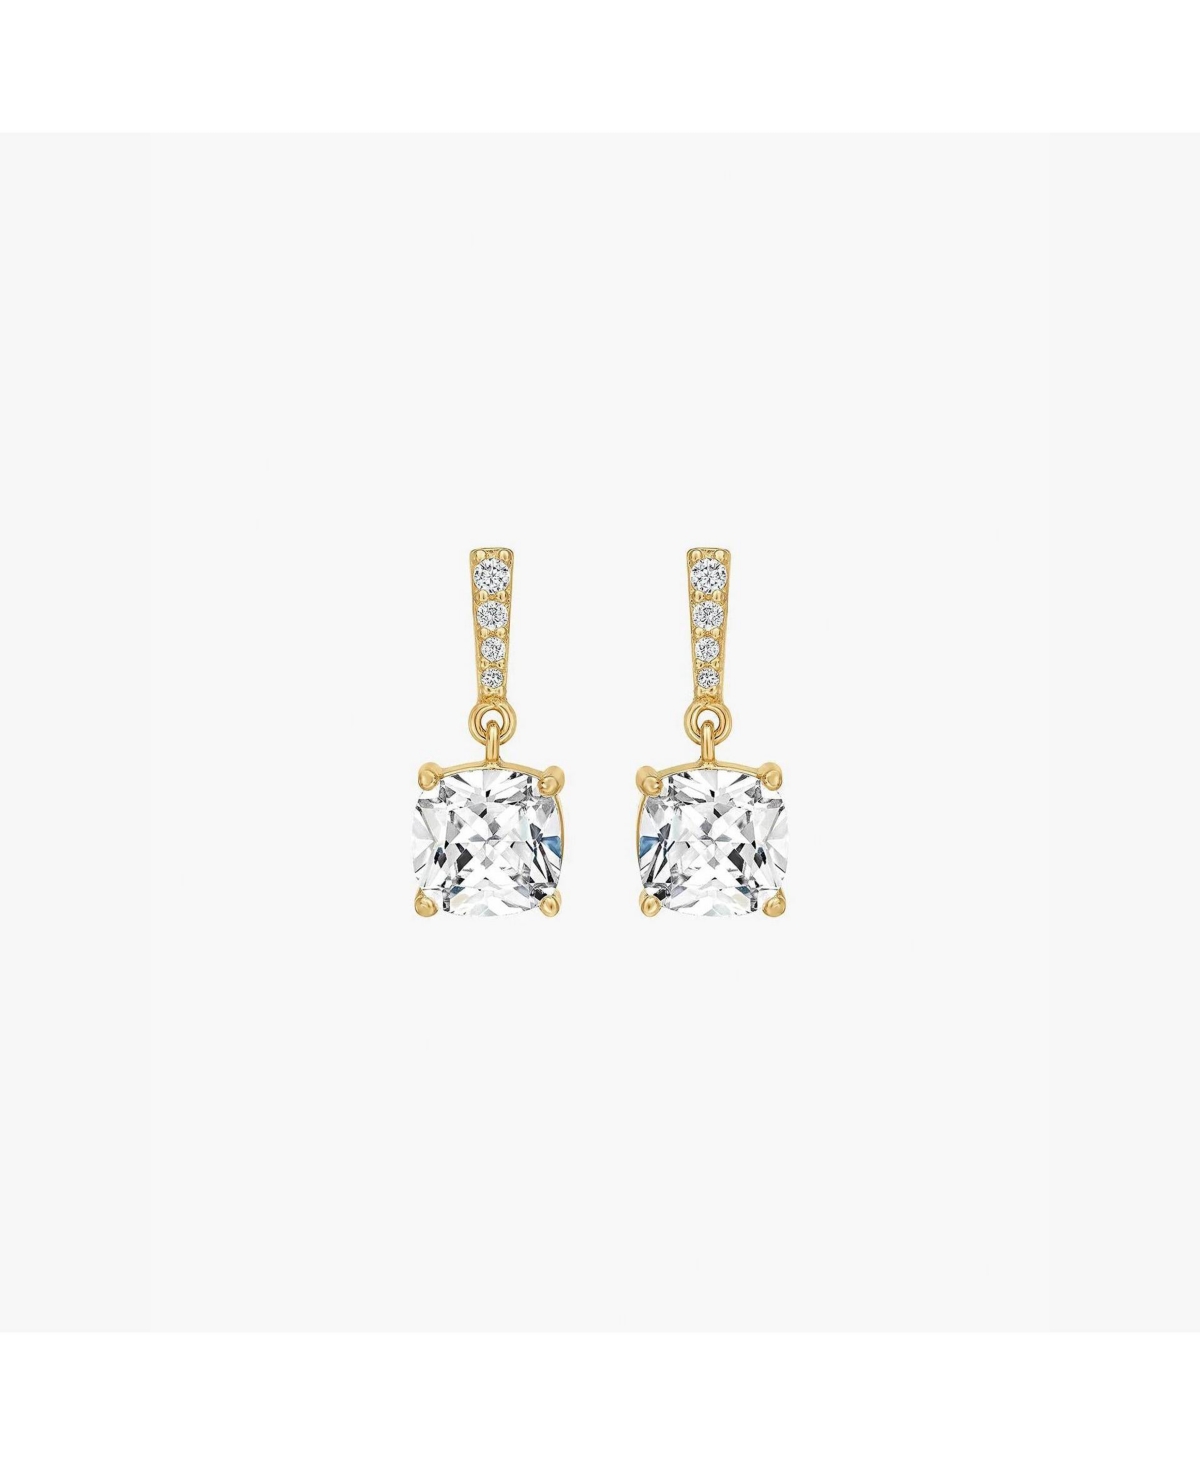 Audrey Square Crystal Dangling Earrings - Yellow gold